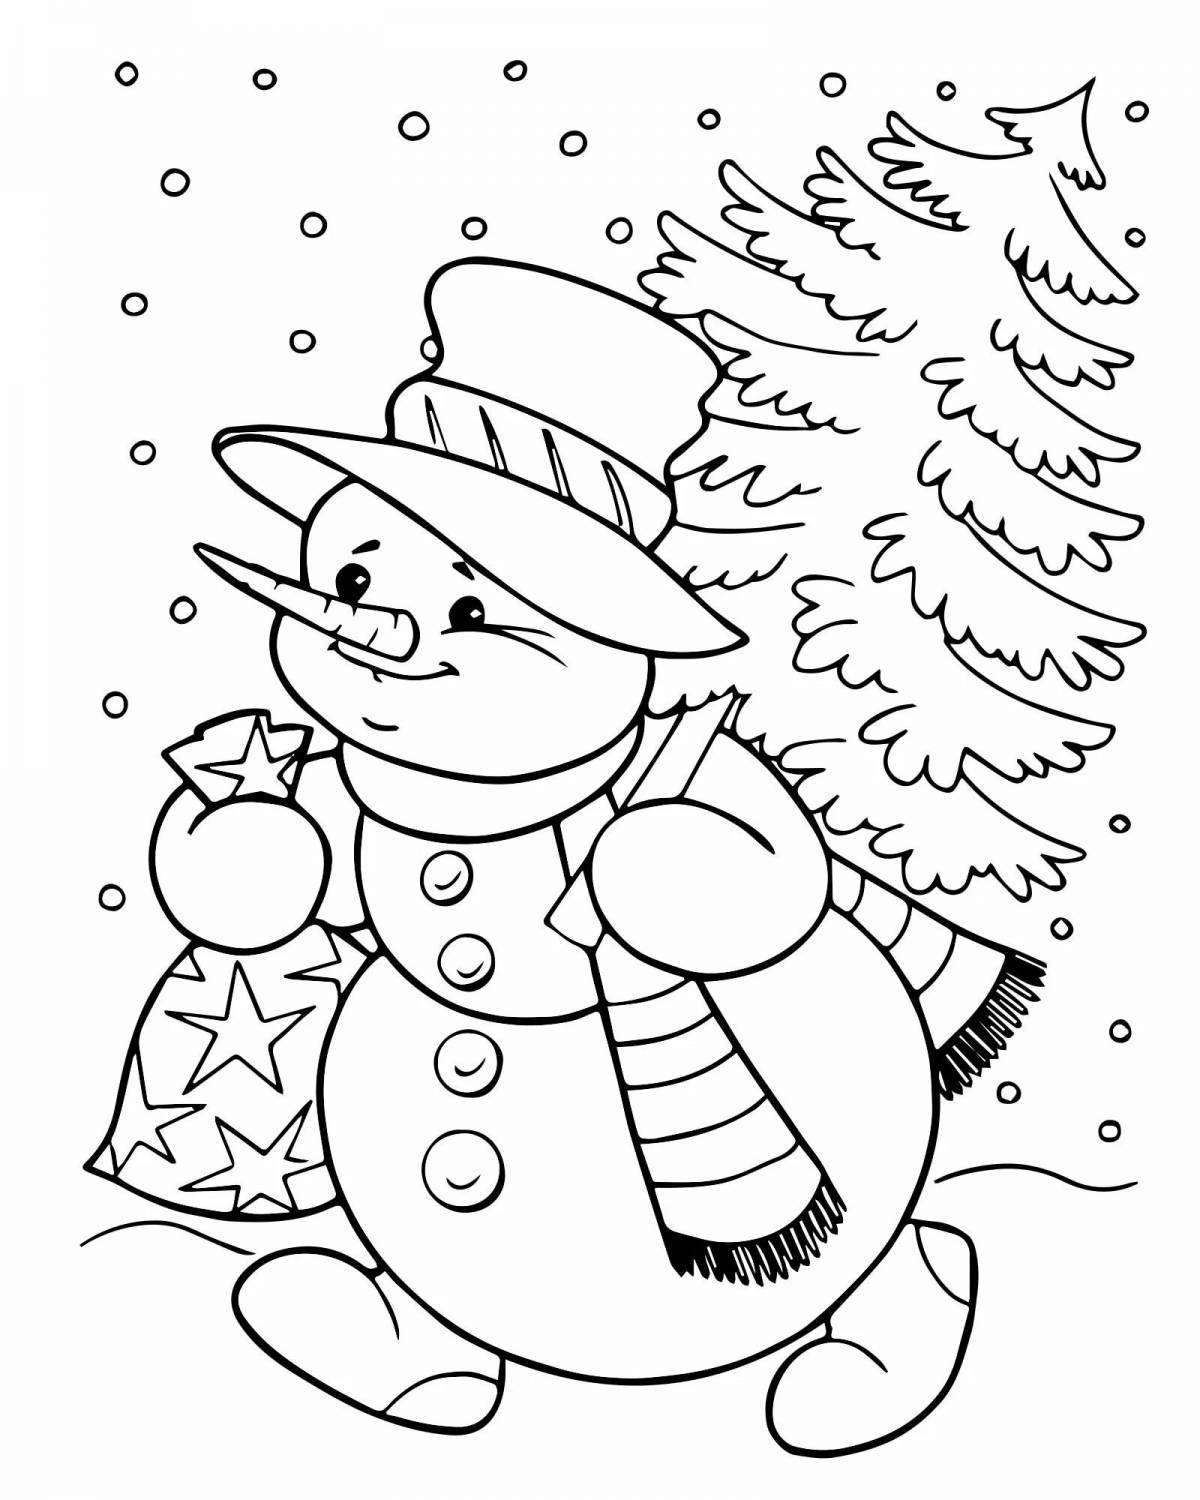 Sparkling snowman coloring book for kids 5 6